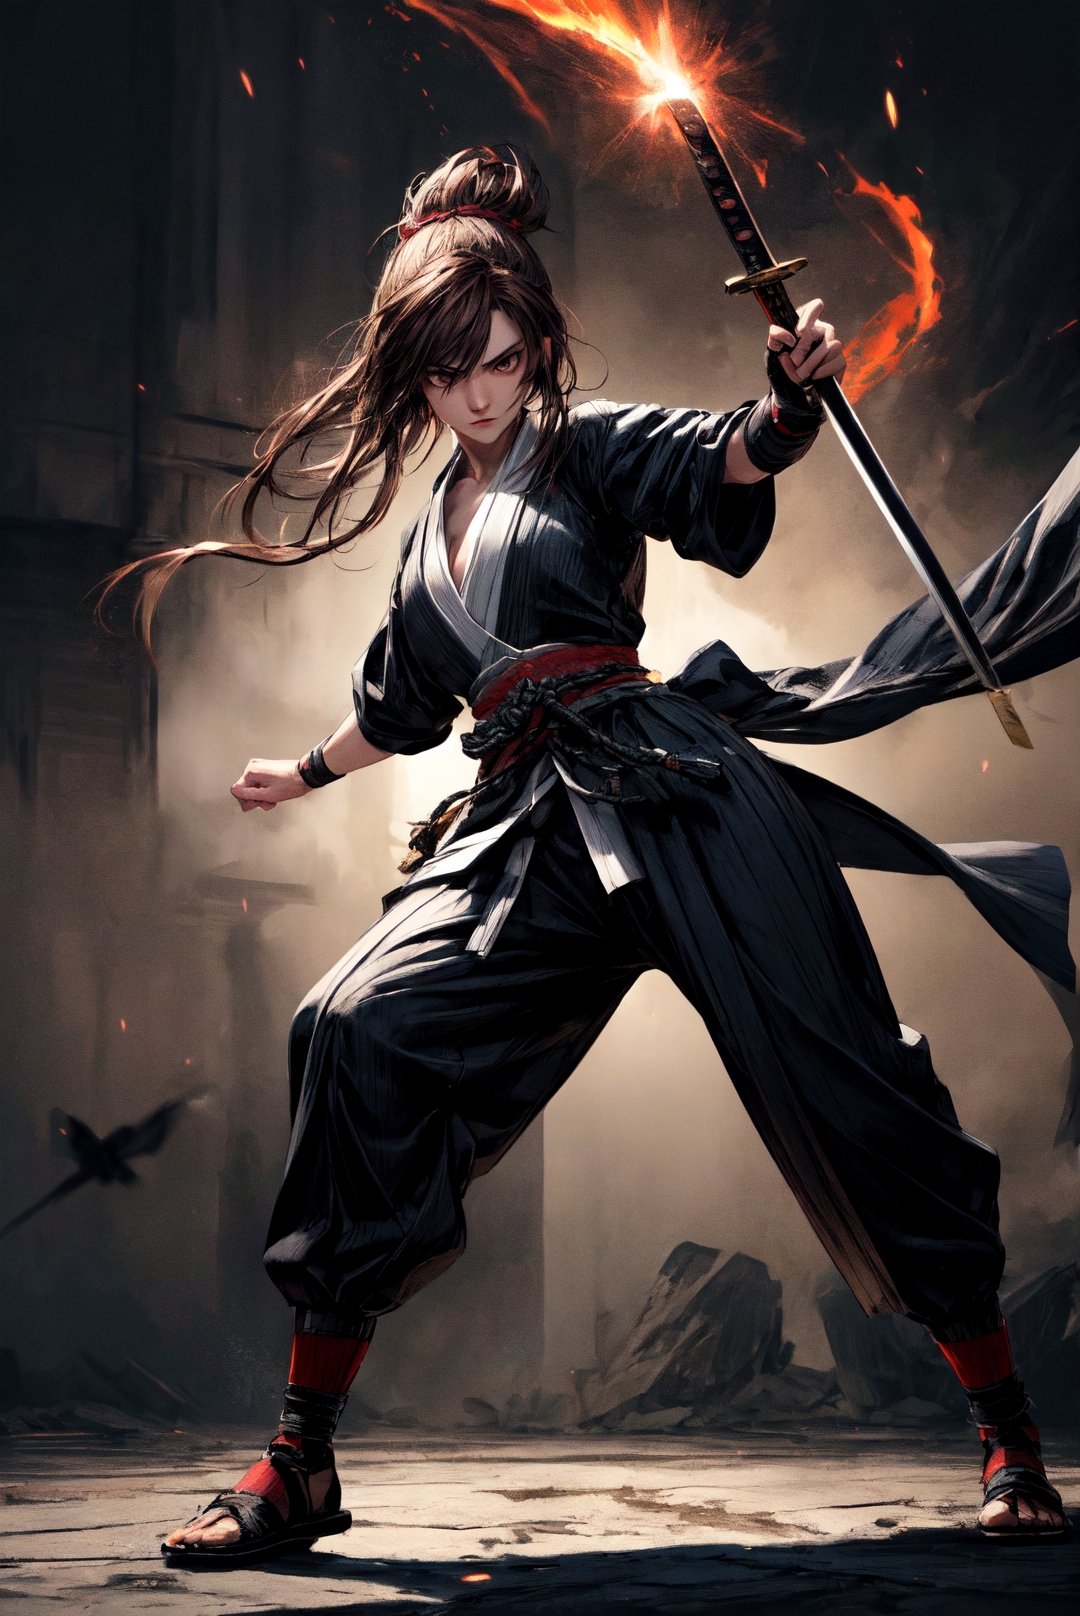 {[(8K quality image), (full body), (ultra quality image), (ultra detailed image), (perfect body), (super detailed)]}, 
Woman samurai, long black hair, reddish brown eyes, defined body, combat stance, serious face, psychedelic setting,